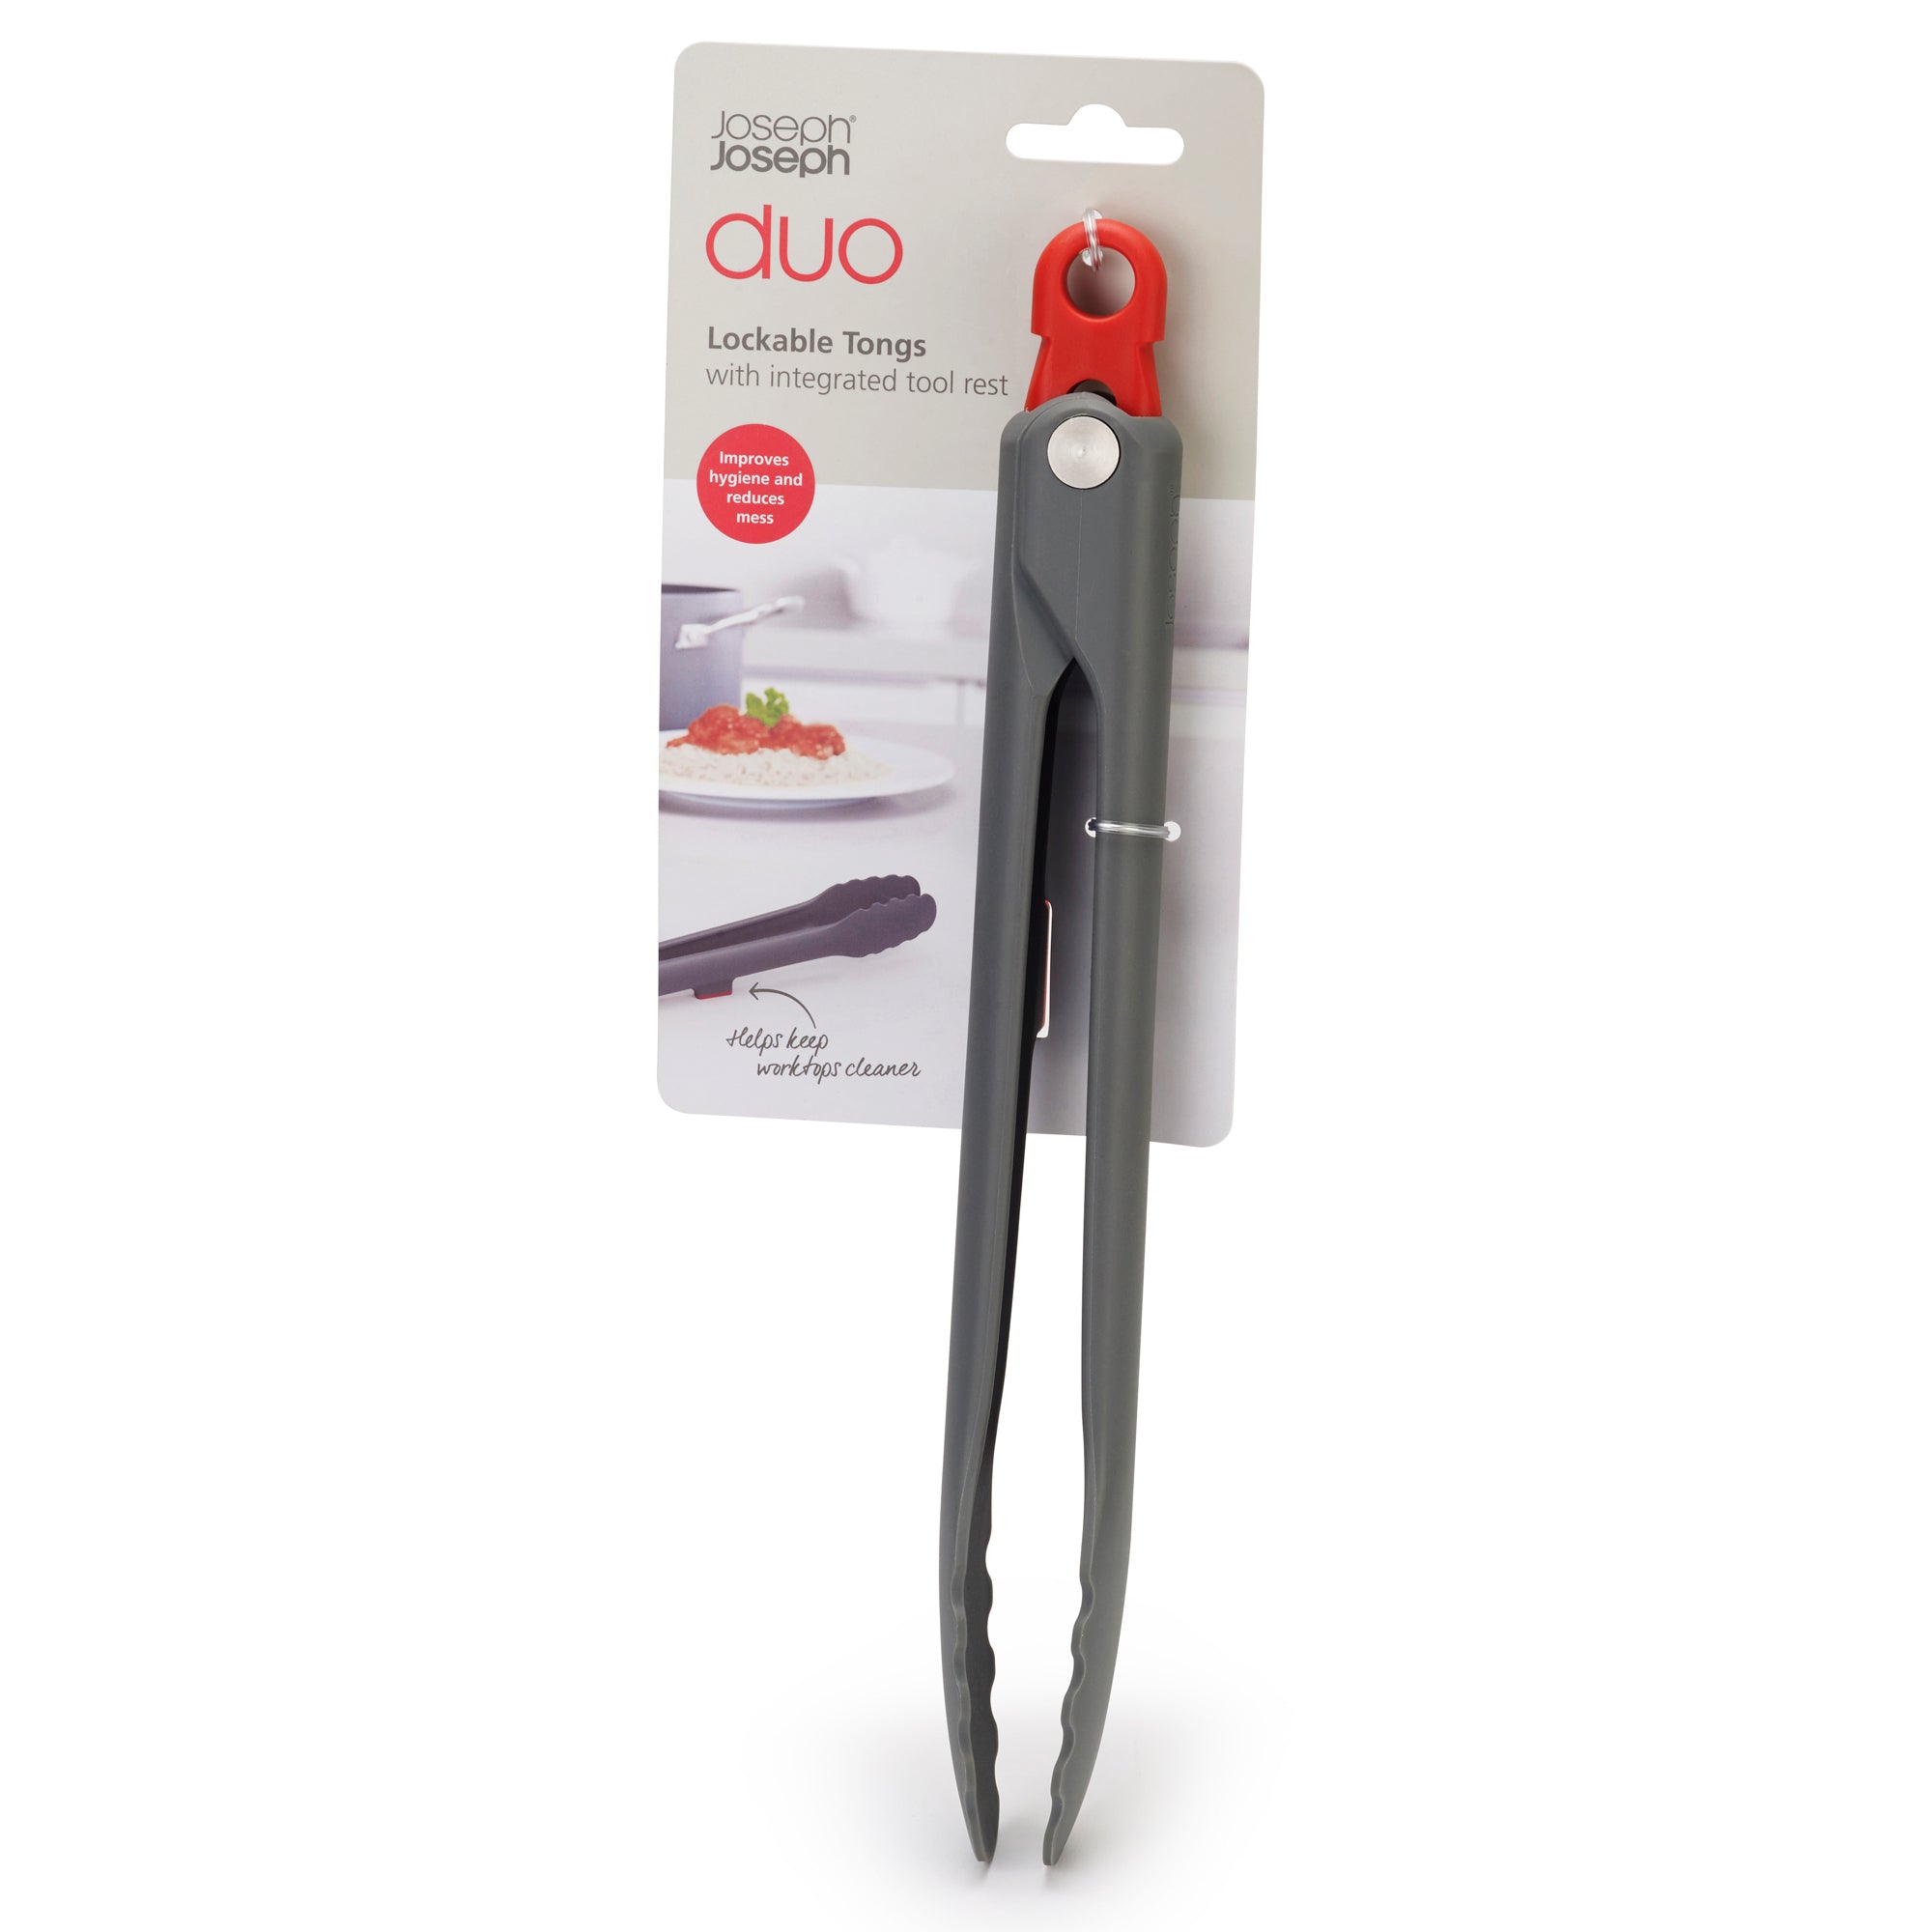 Duo Lockable Tongs with Tool Rest - Grey/Red